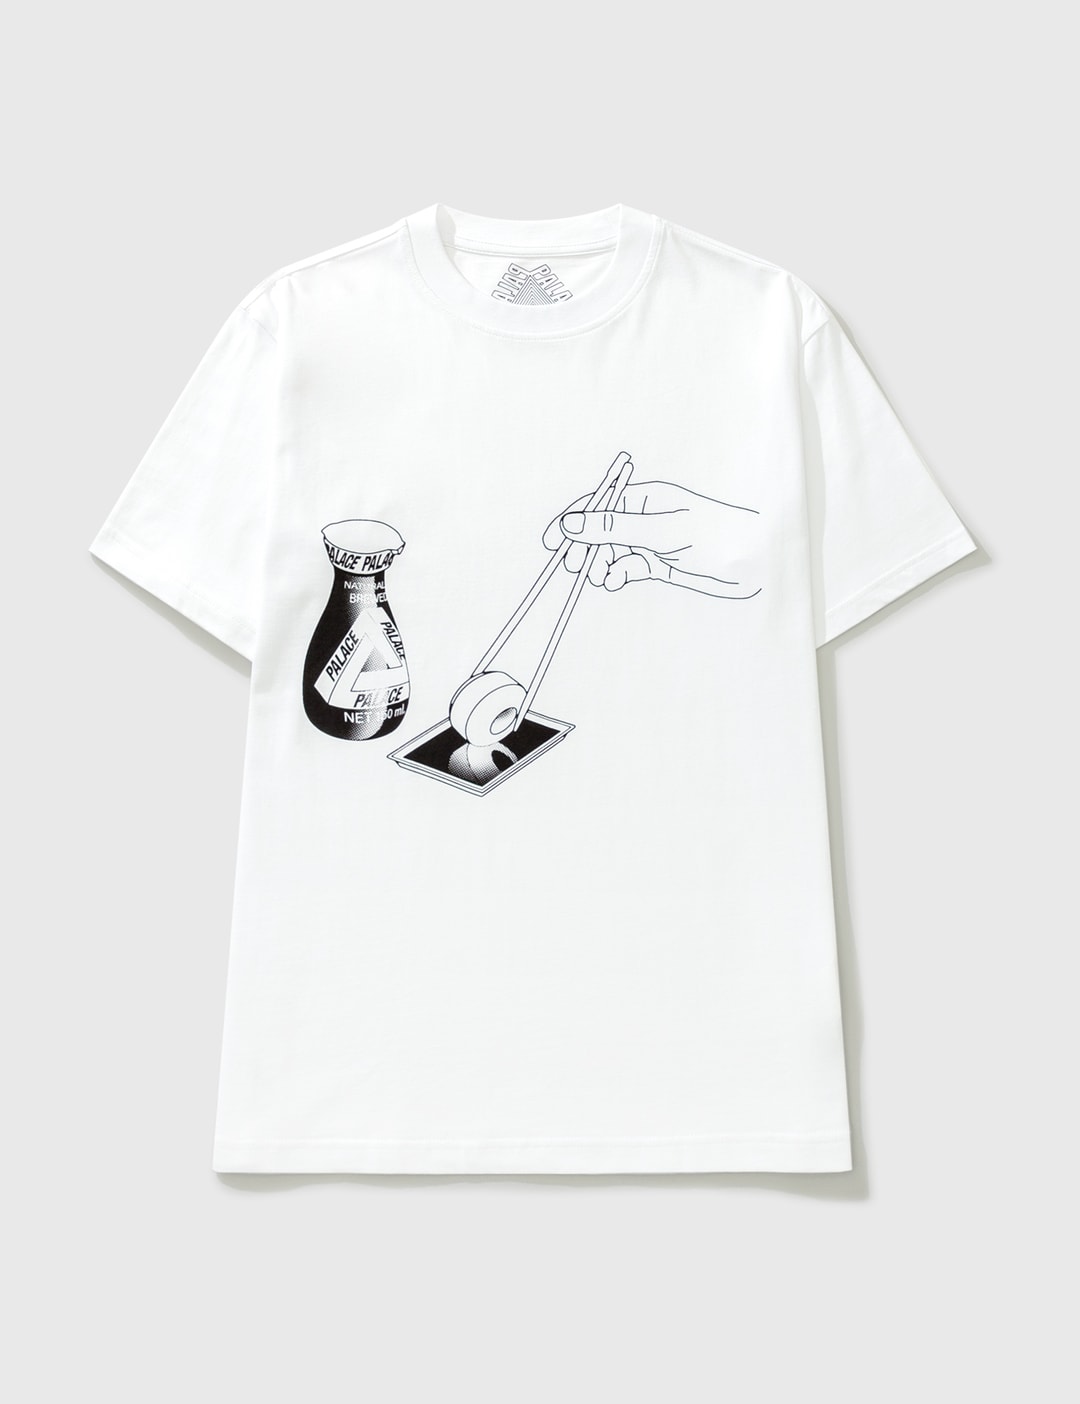 snowman builder transaction Palace Skateboards - Palace Chopsticks Ss T-shirt | HBX - Globally Curated  Fashion and Lifestyle by Hypebeast